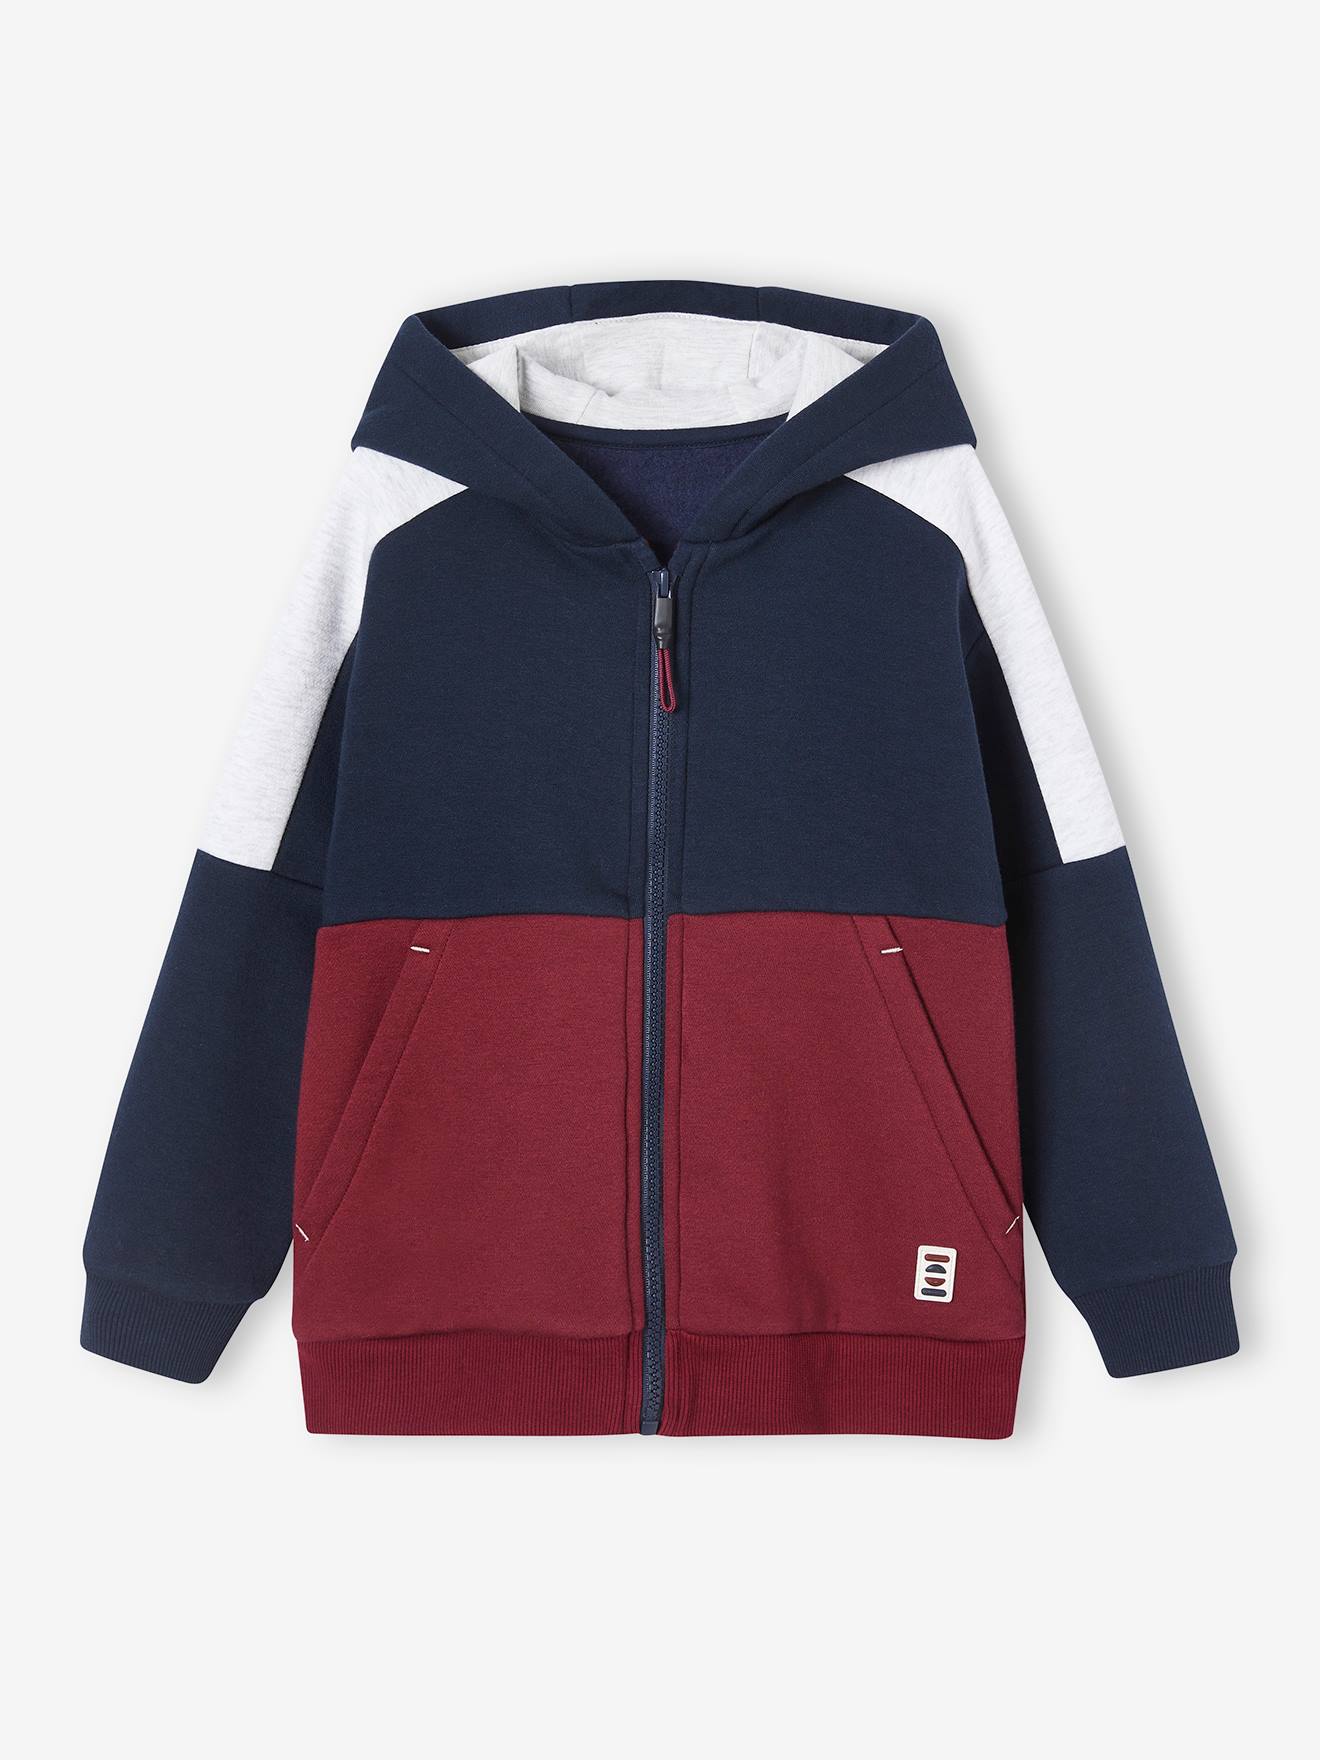 Sports Jacket with Zip & Hood, Colourblock Effect, for Boys bordeaux red